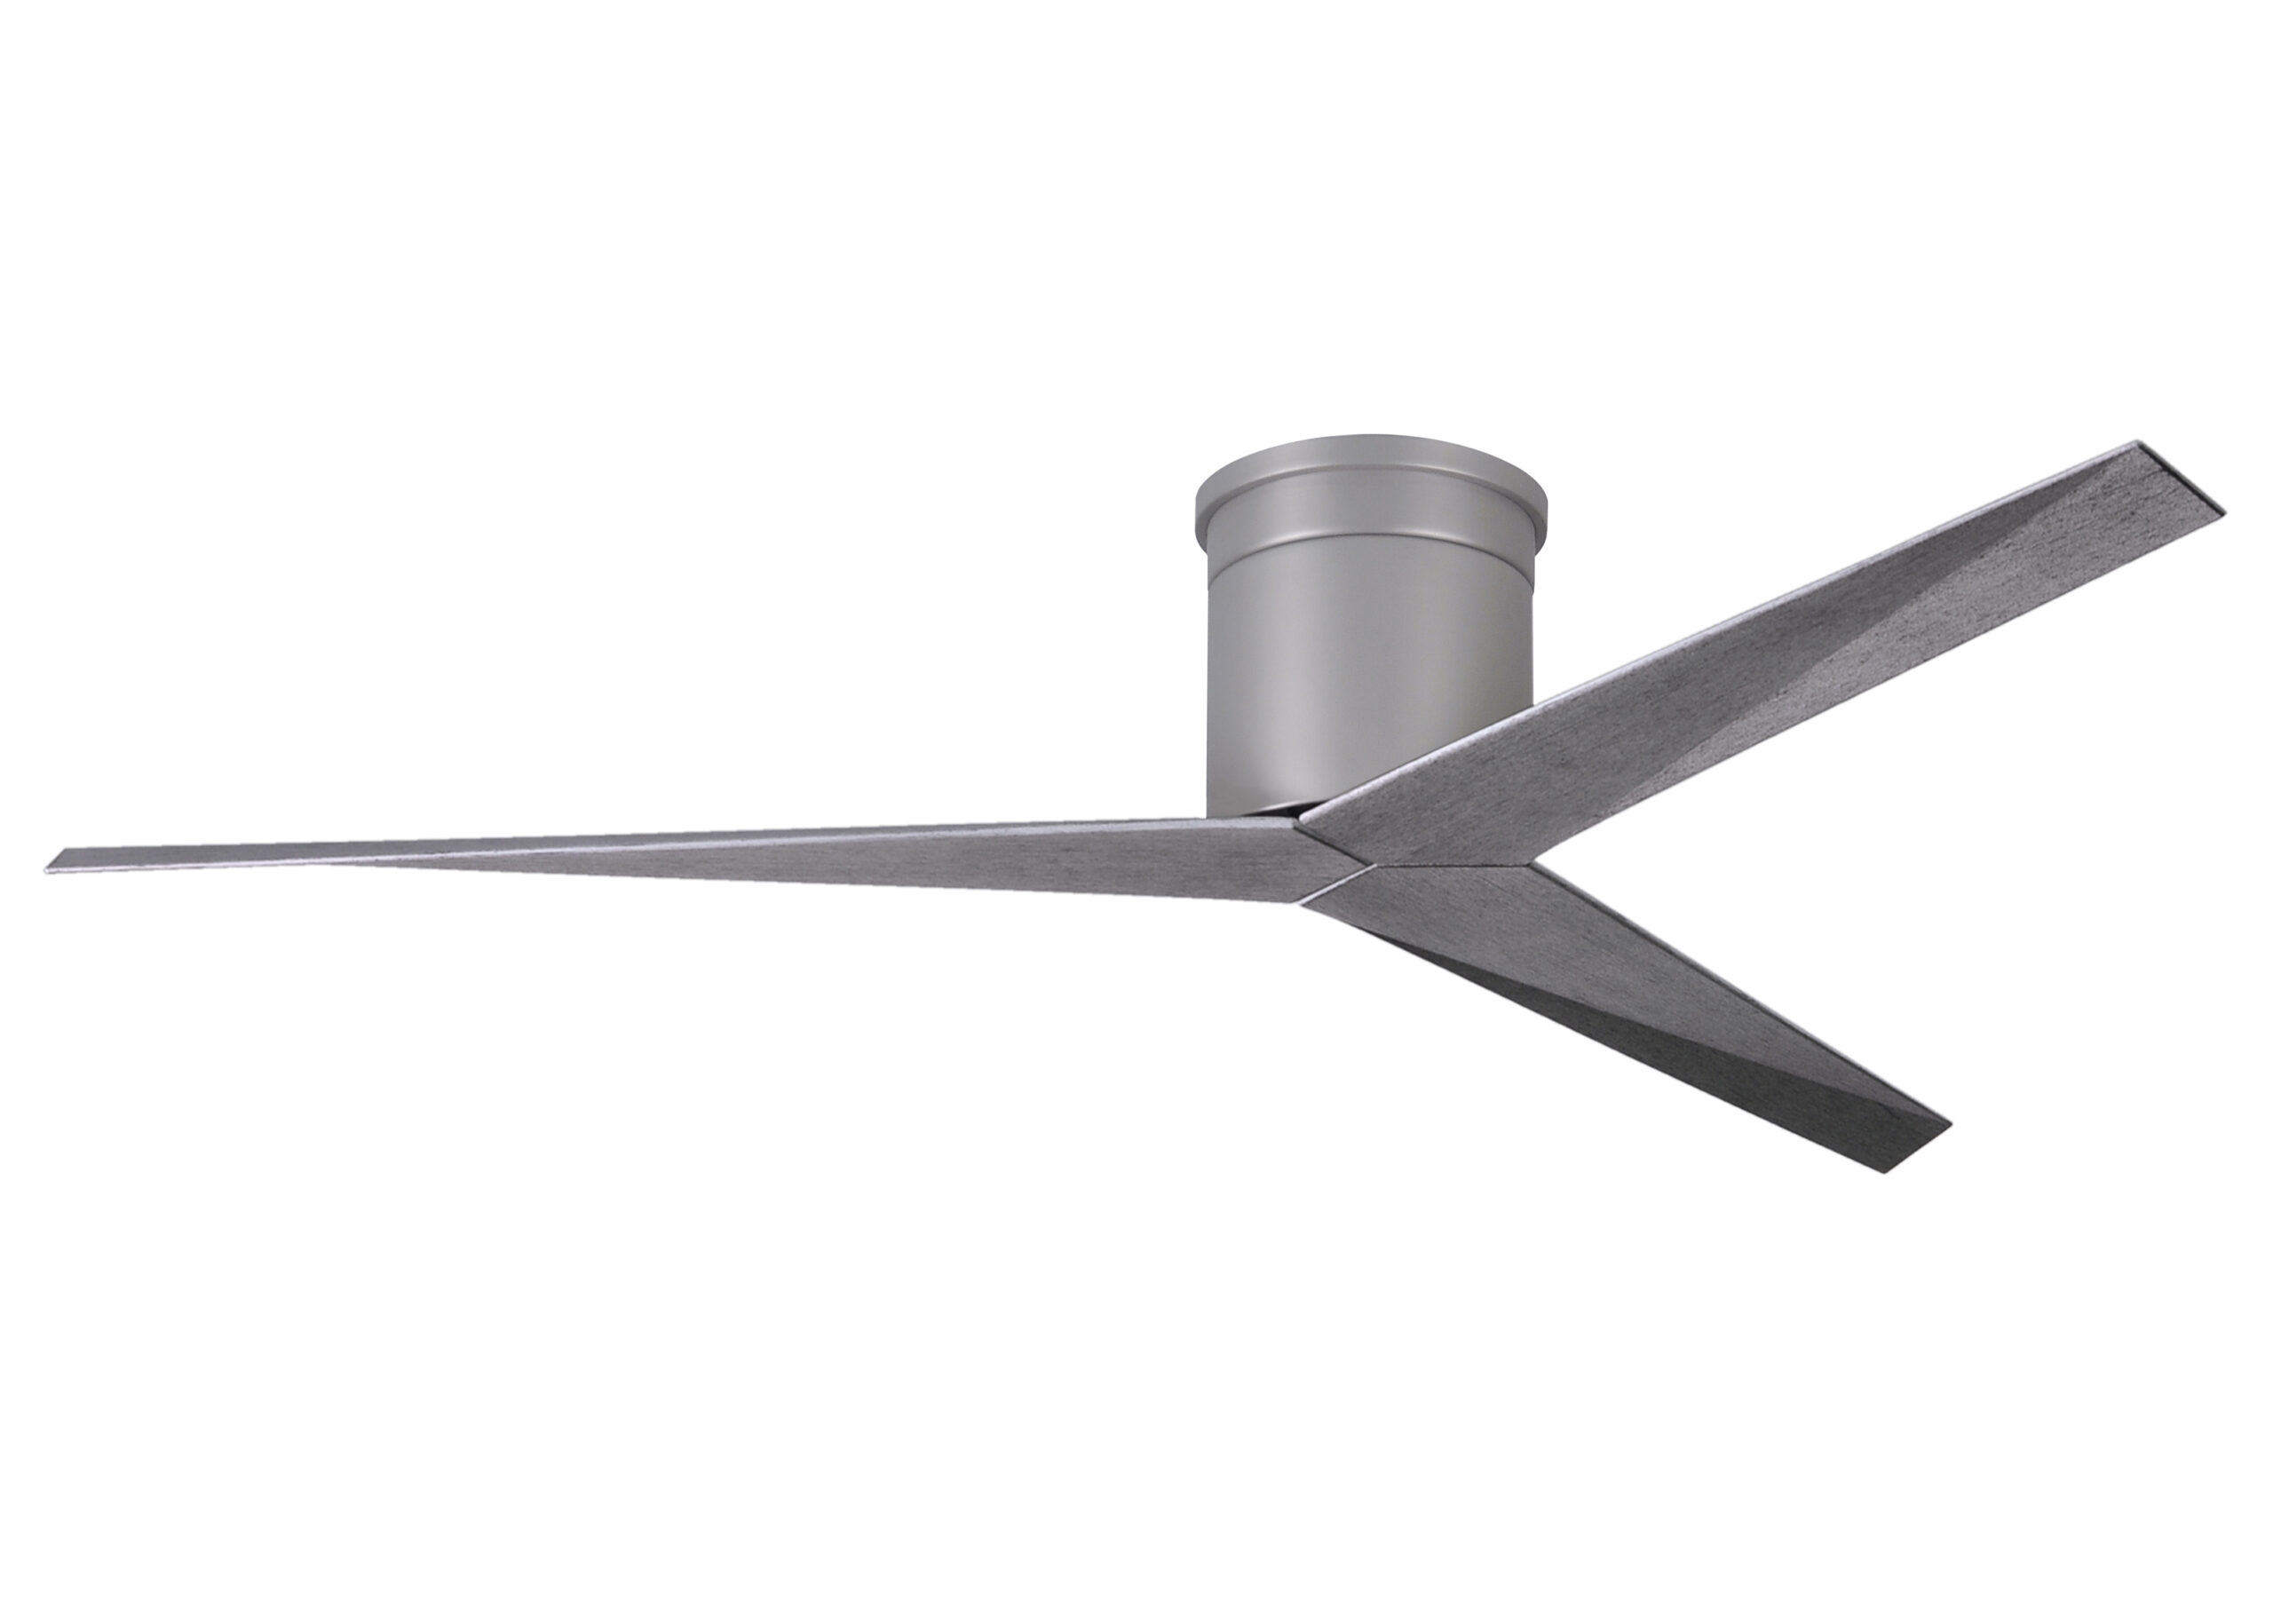 Eliza-H ceiling fan in Brushed Nickel with Barn Wood blades